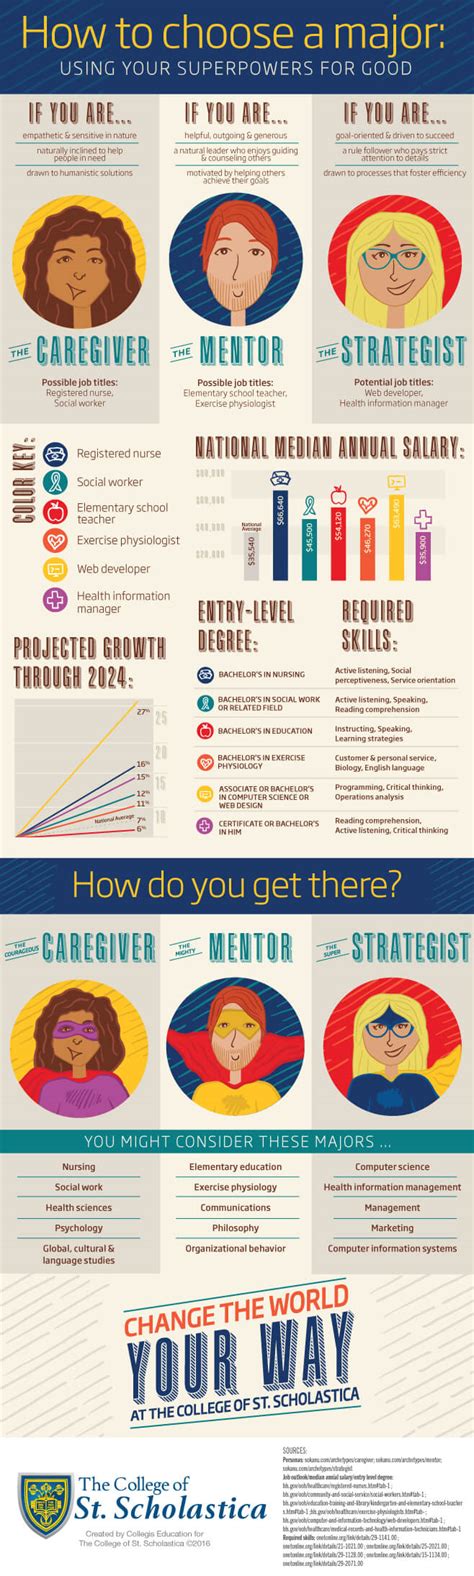 How To Choose A Major Using Your Superpowers For Good Infographic